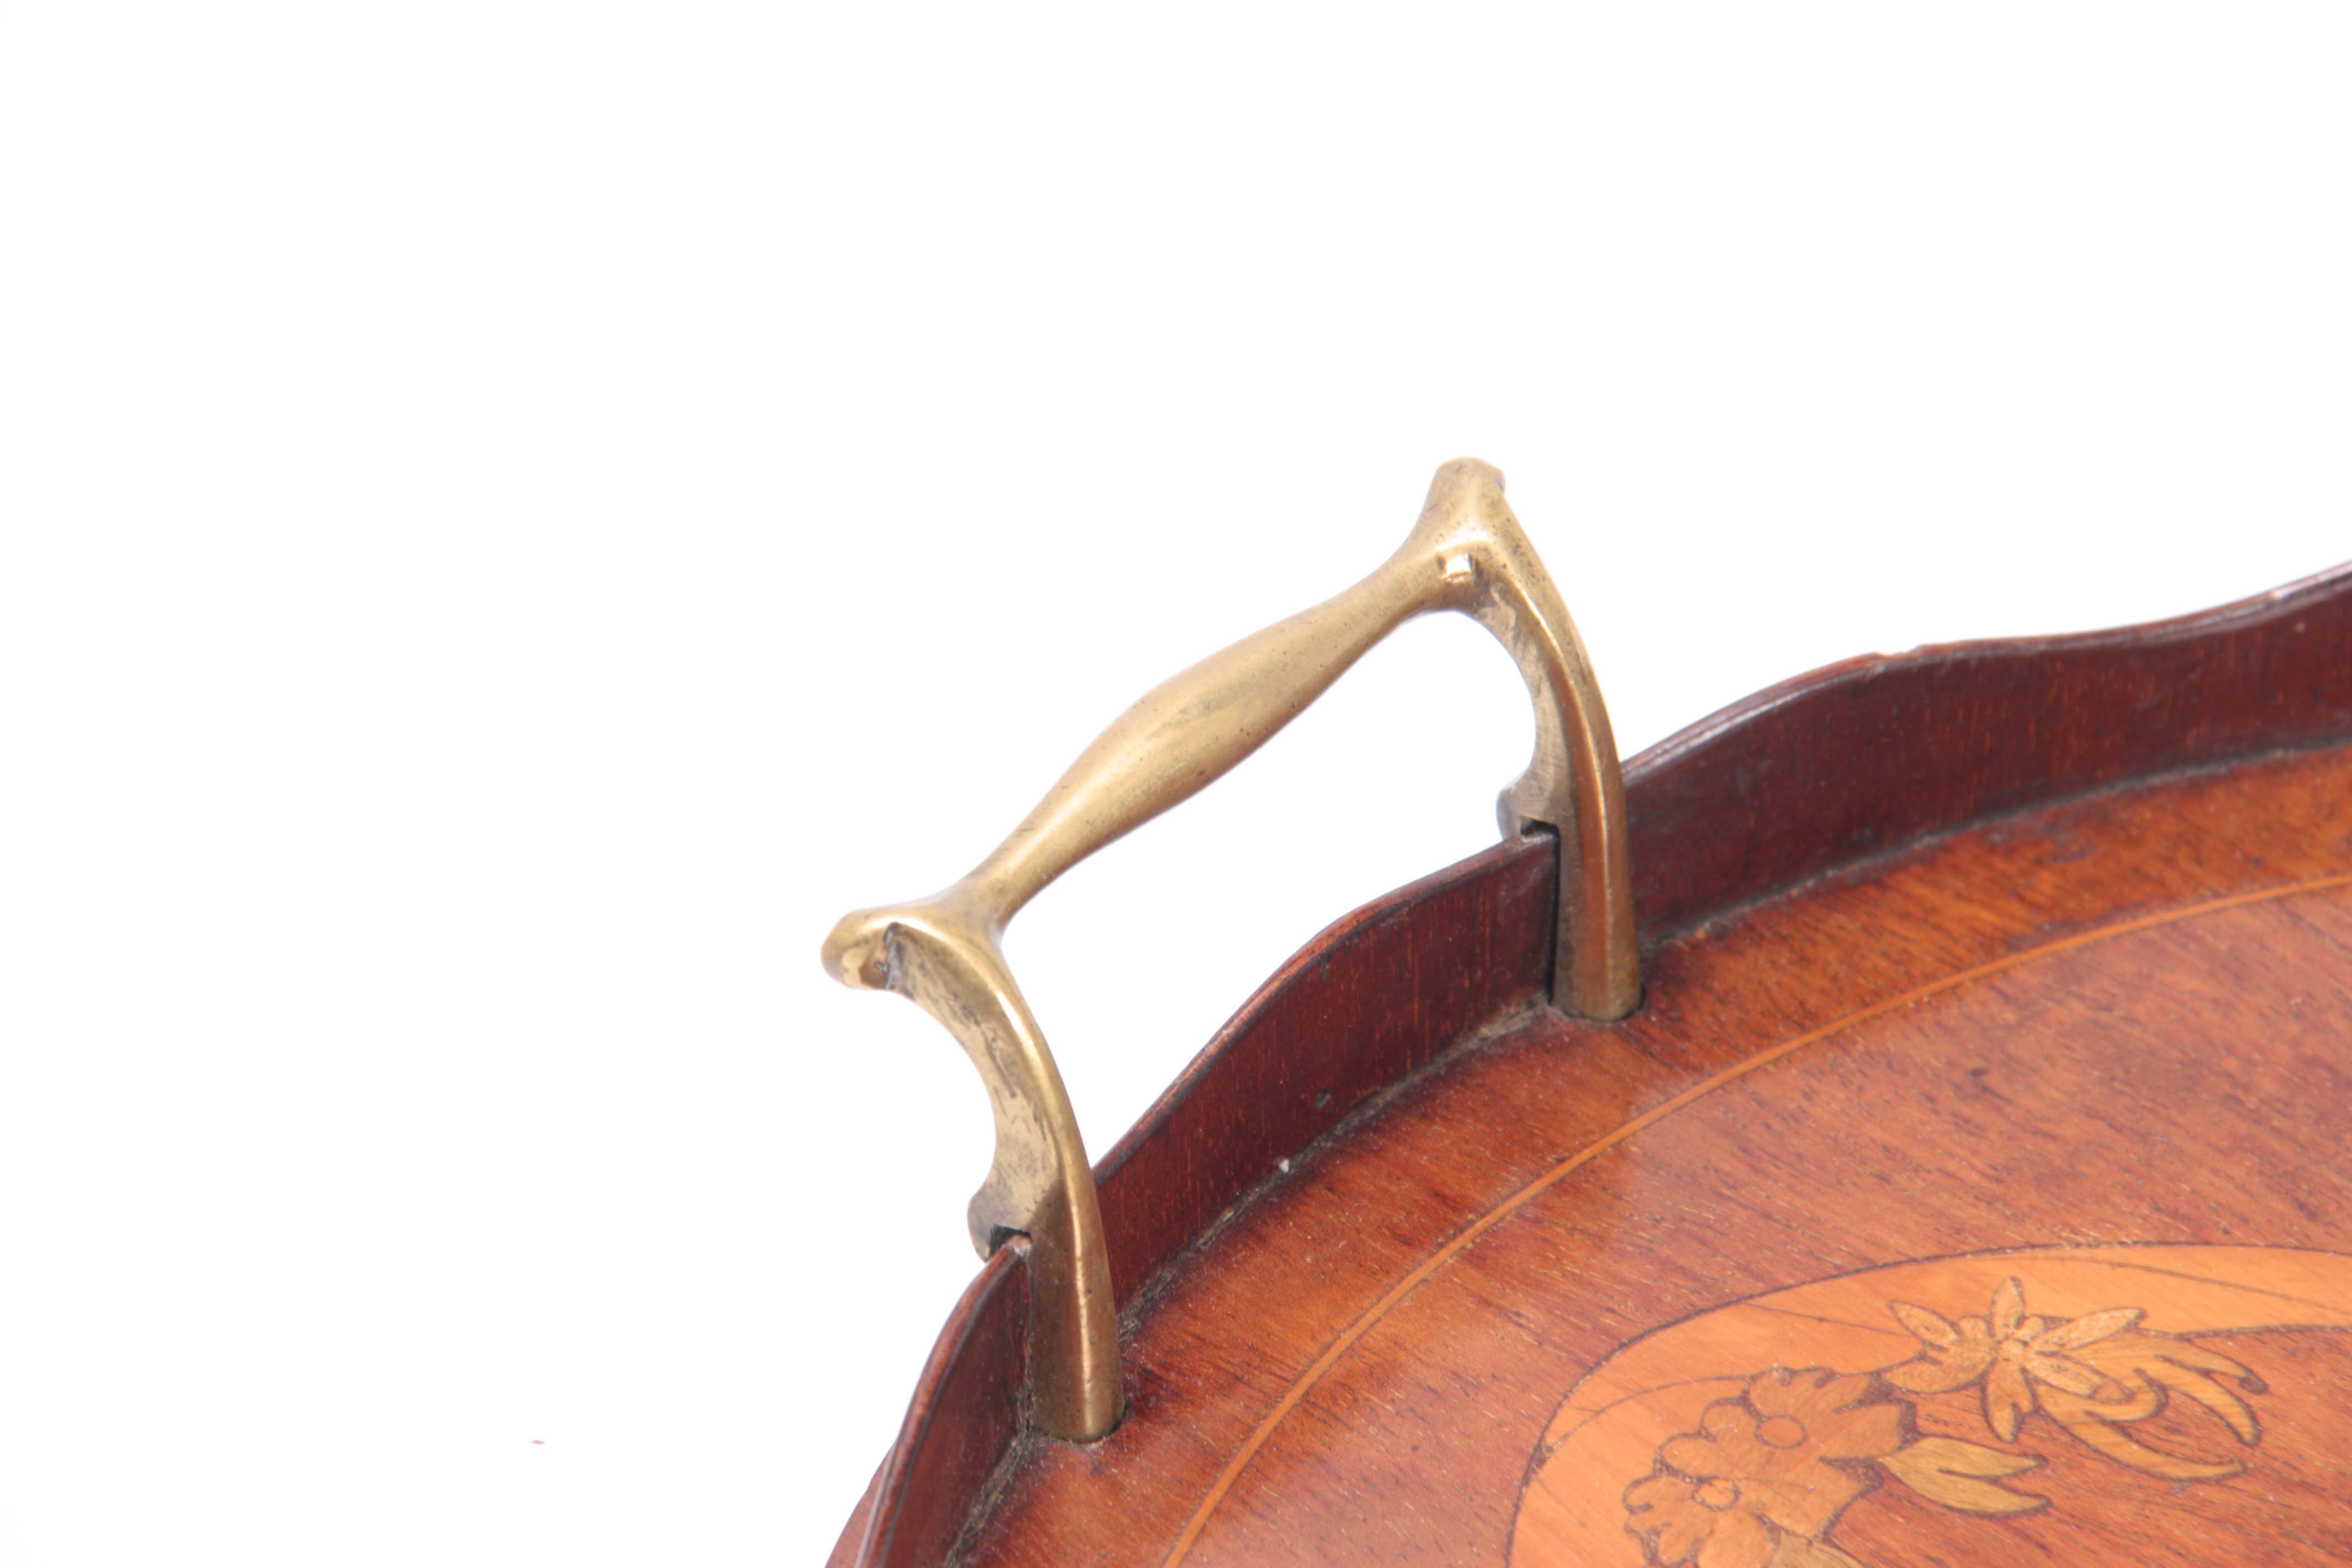 A 19TH CENTURY INLAID MAHOGANY OVAL TRAY with brass side handles and wavey edge gallery 71cm wide - Image 3 of 3